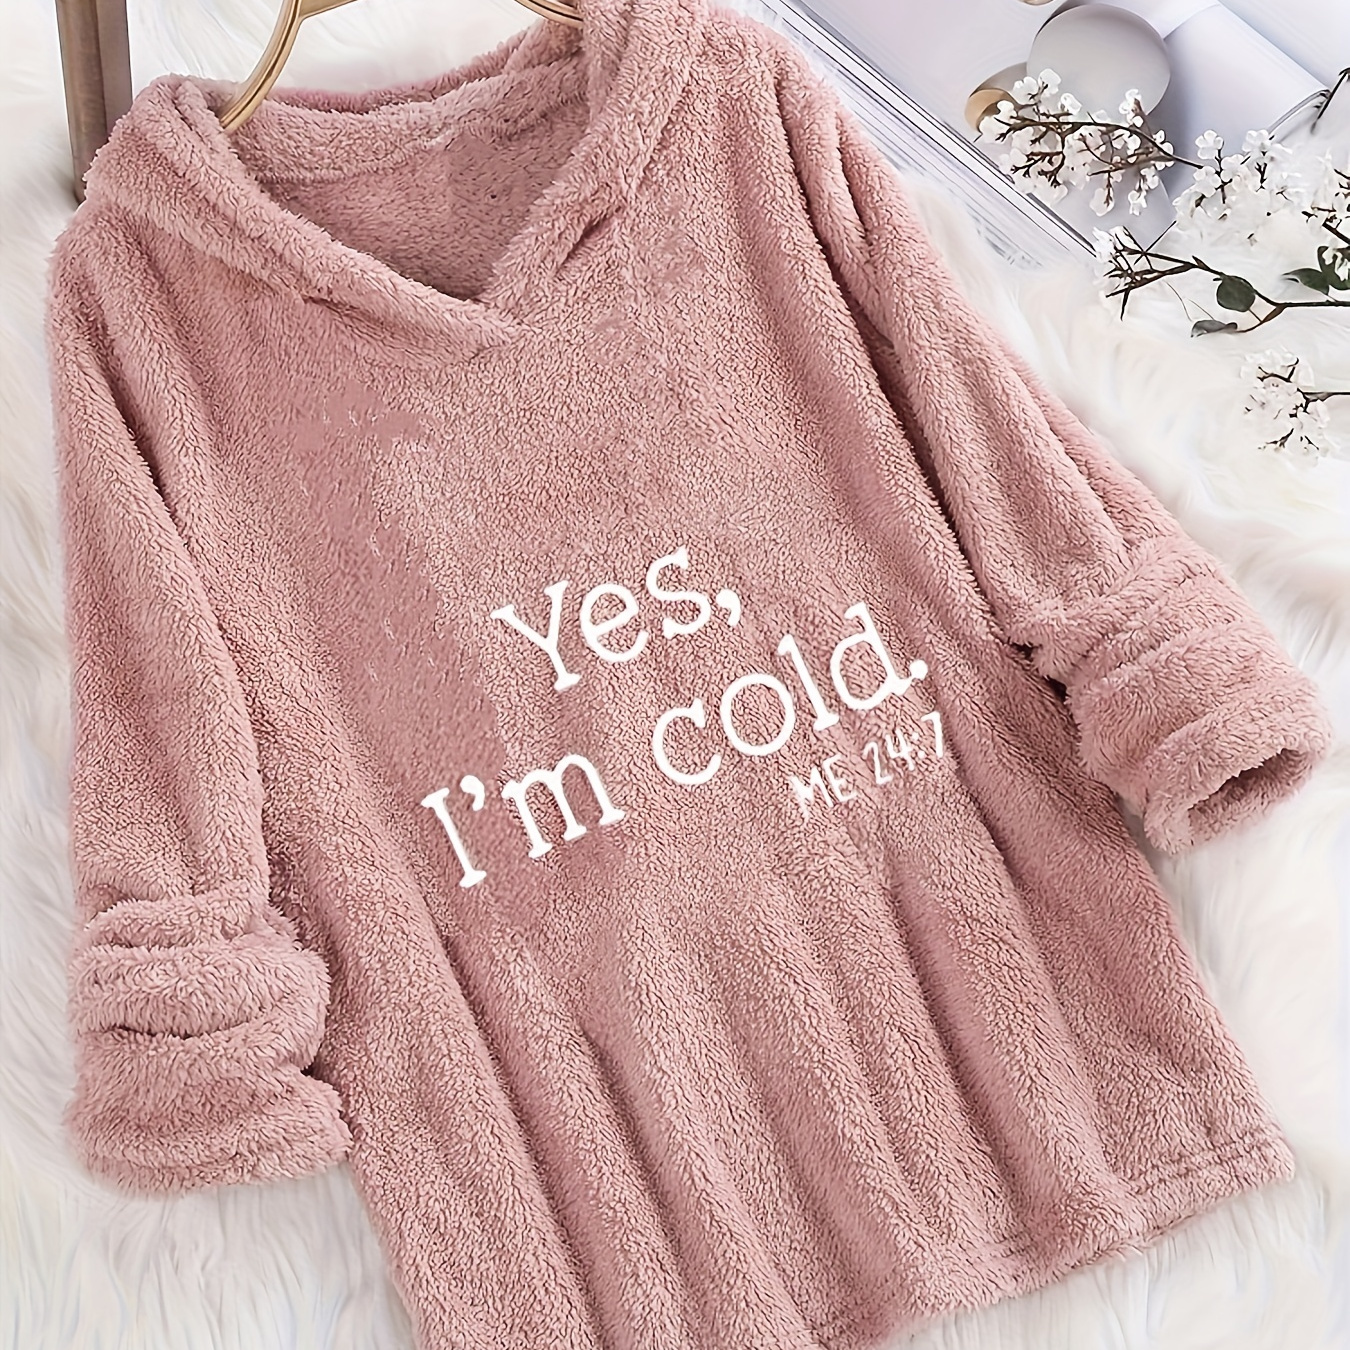 

I'm Cold Letter Print Fuzzy Hoodie, Casual Long Sleeve Oversized Sweatshirt, Women's Clothing